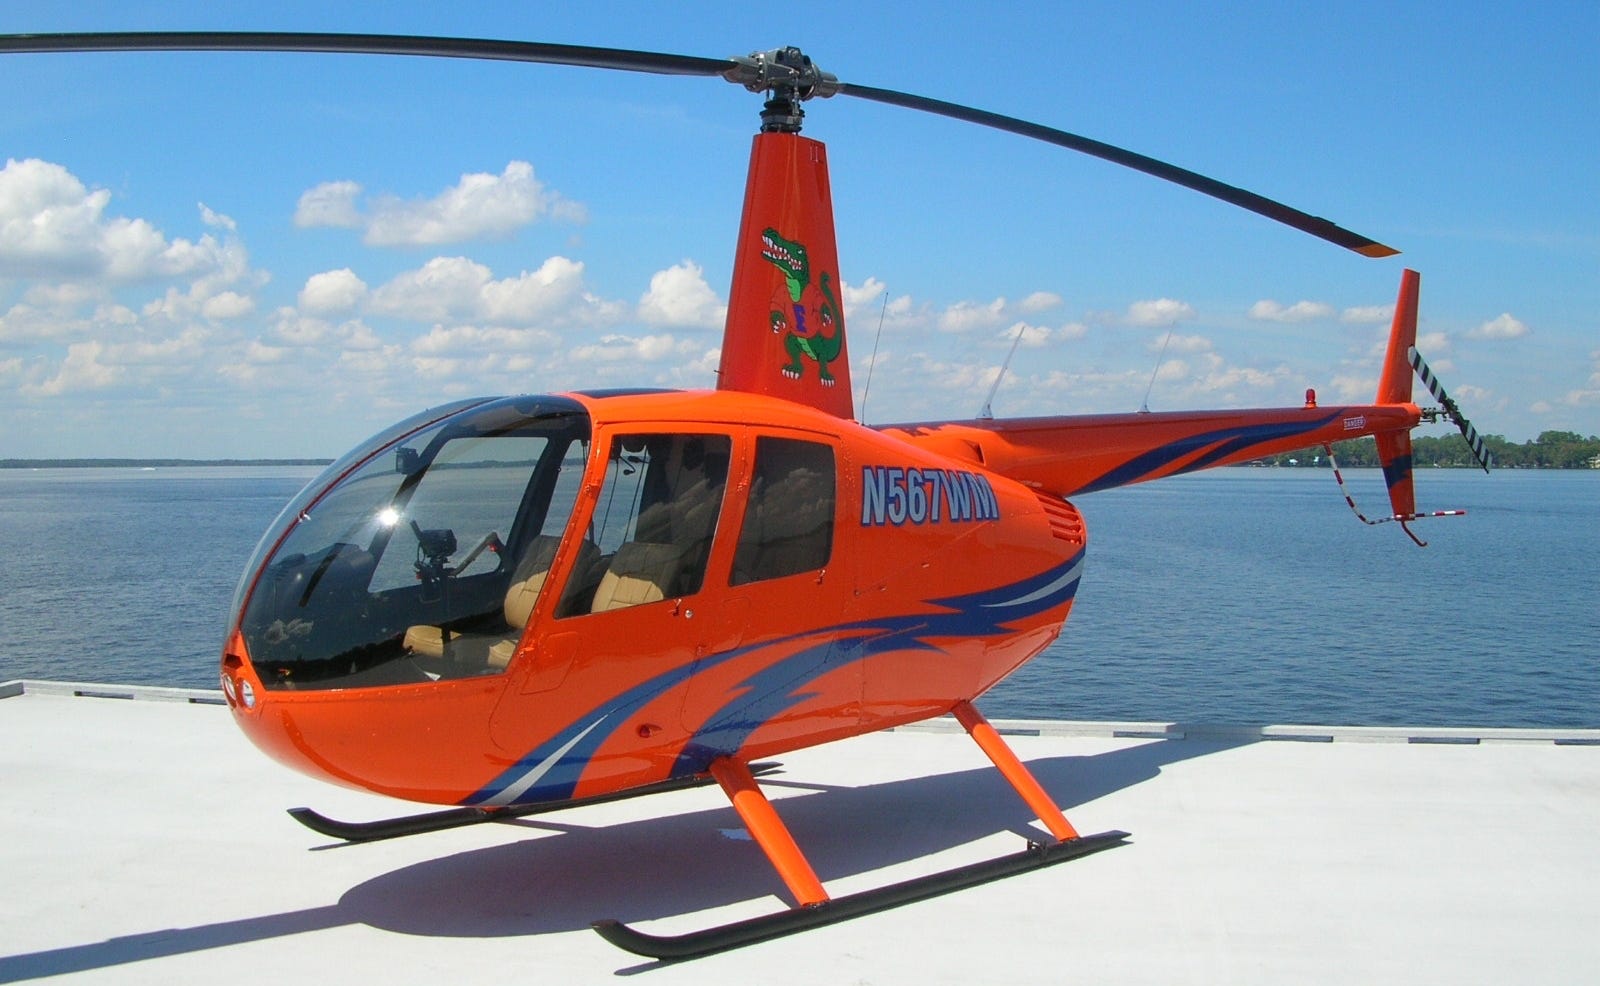 Experience Luxury with Capital Exotic’s Helicopter Charter Tours